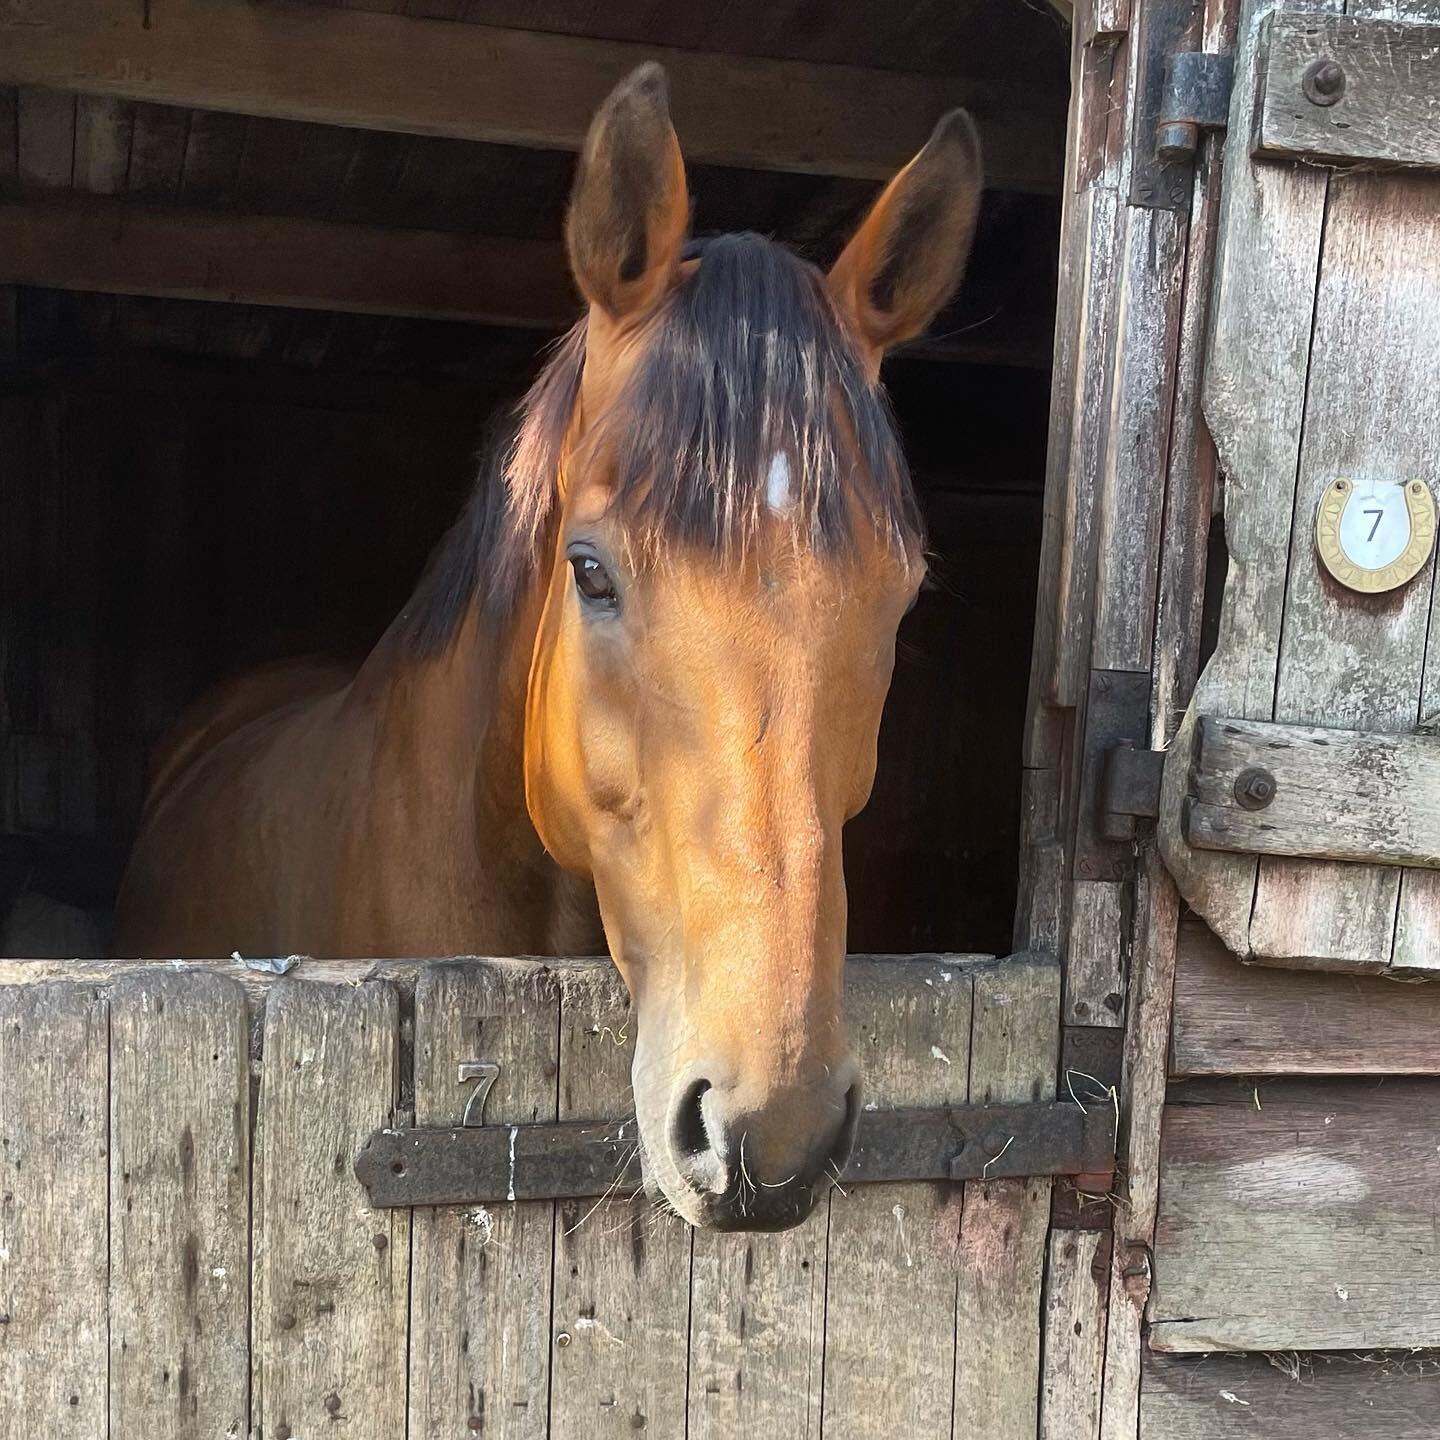 ⭐️ 𝐈𝐧𝐭𝐫𝐨𝐝𝐮𝐜𝐢𝐧𝐠 . . . Benji! A lovely horse with a very kind soul. Though, he definitely has his cheeky antics and moments that shine through! Has some lovely paces, a delight to ride. ⭐️ #pony#riding#horse#horse-riding#ukridingschool#briti